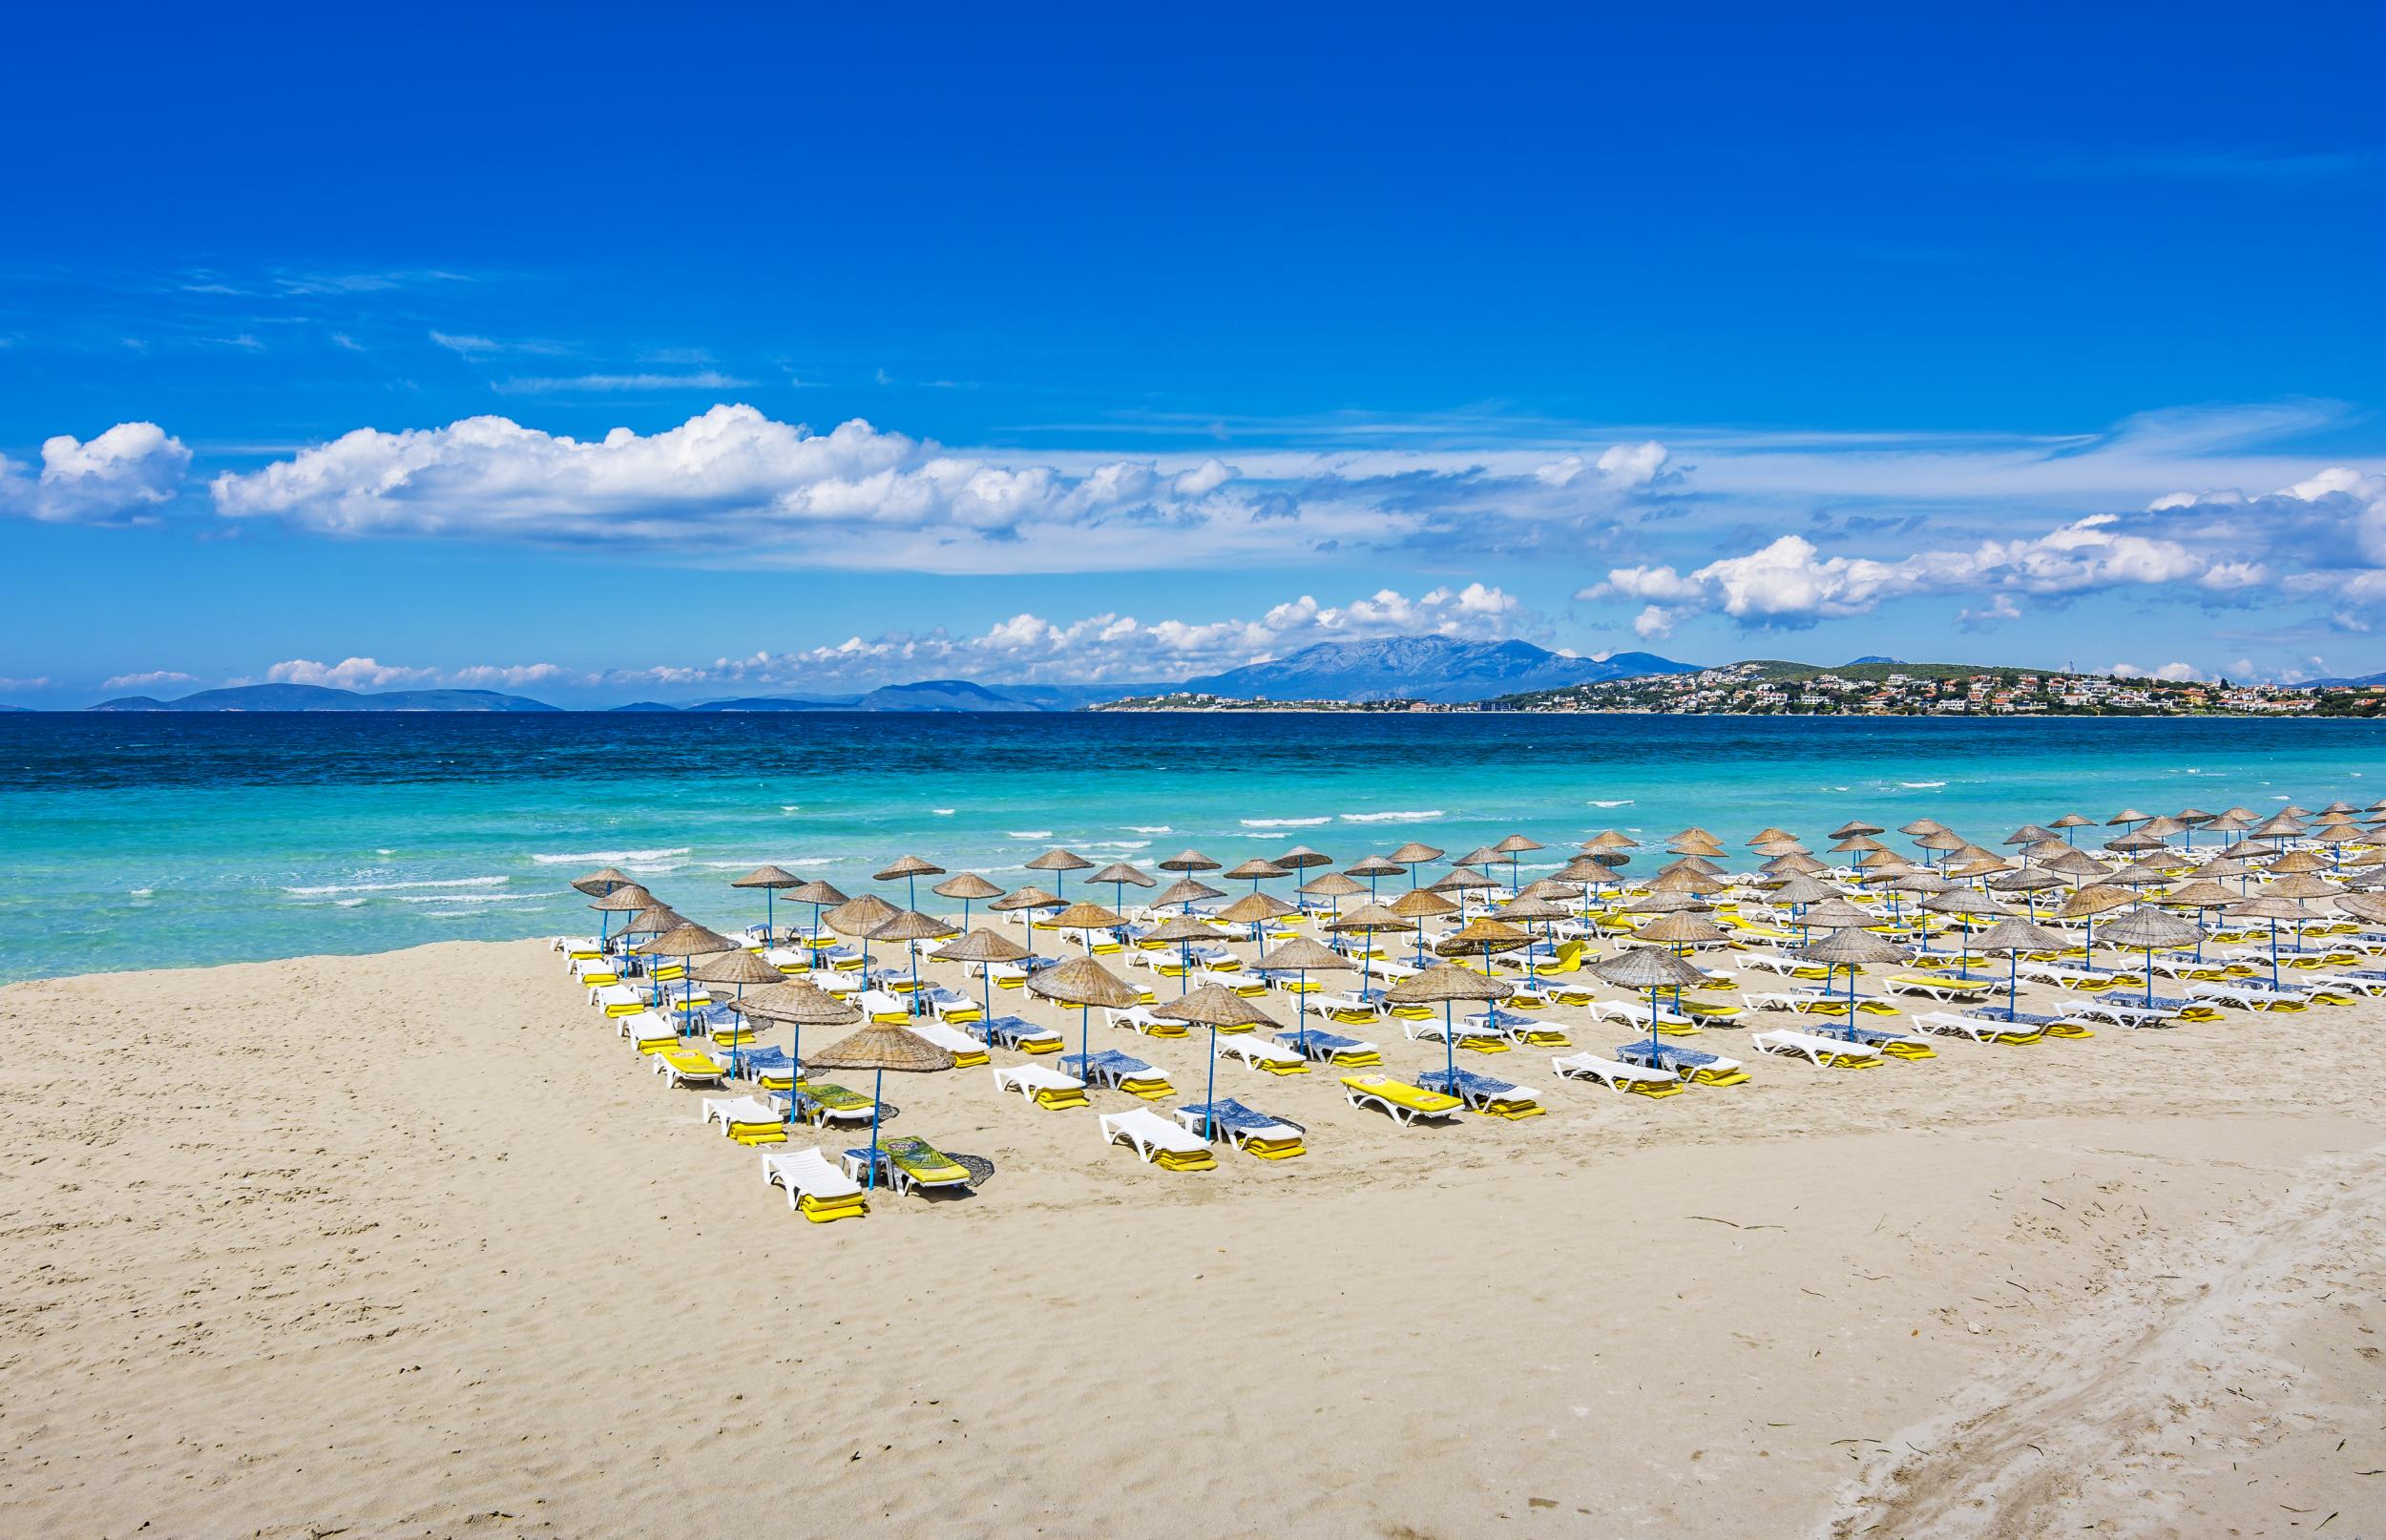 Turkey offers some of the cheapest all-inclusive package deals this summer